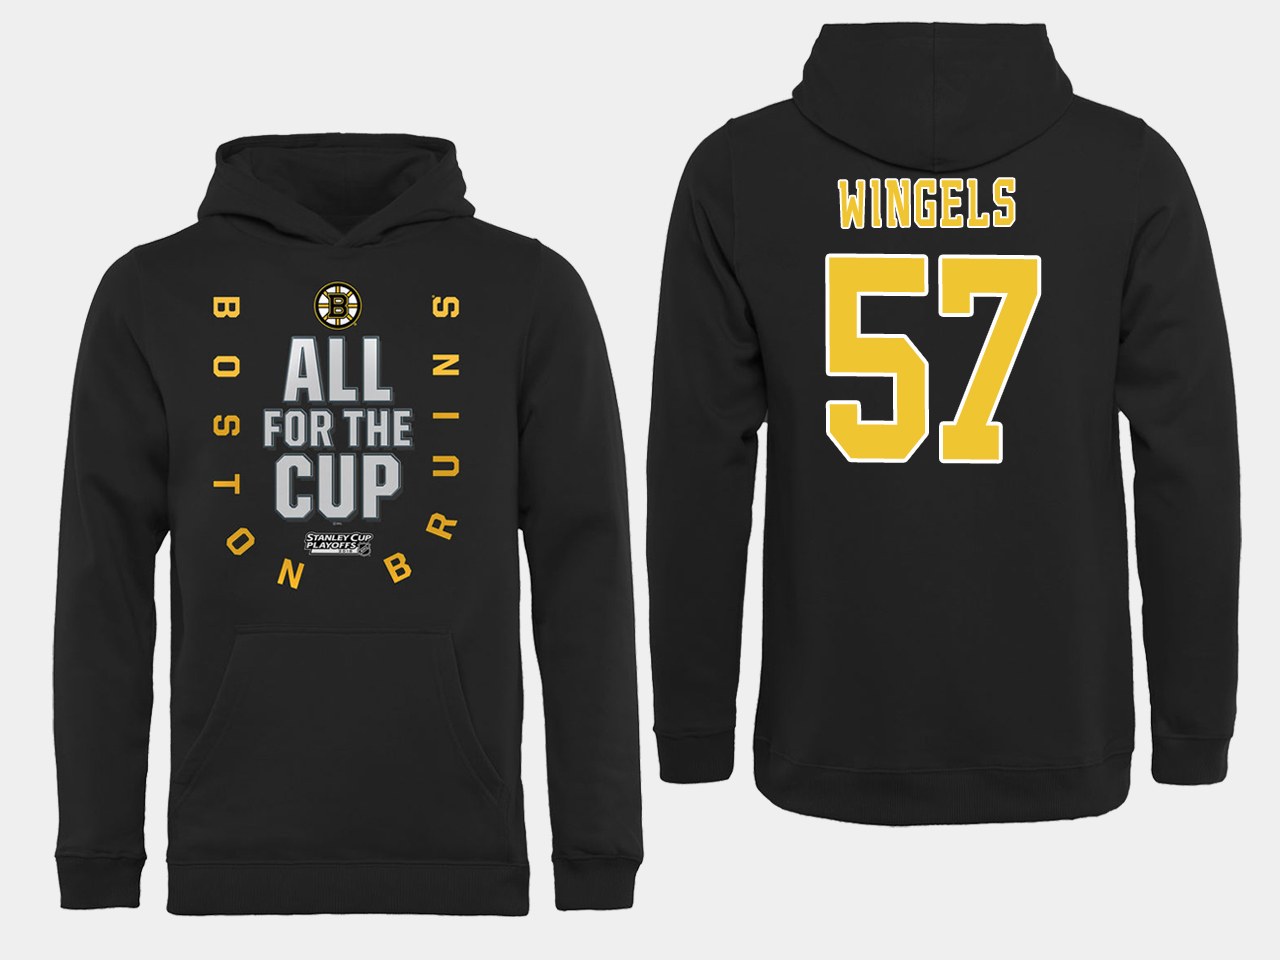 NHL Men Boston Bruins #57 Wingels Black All for the Cup Hoodie->boston bruins->NHL Jersey